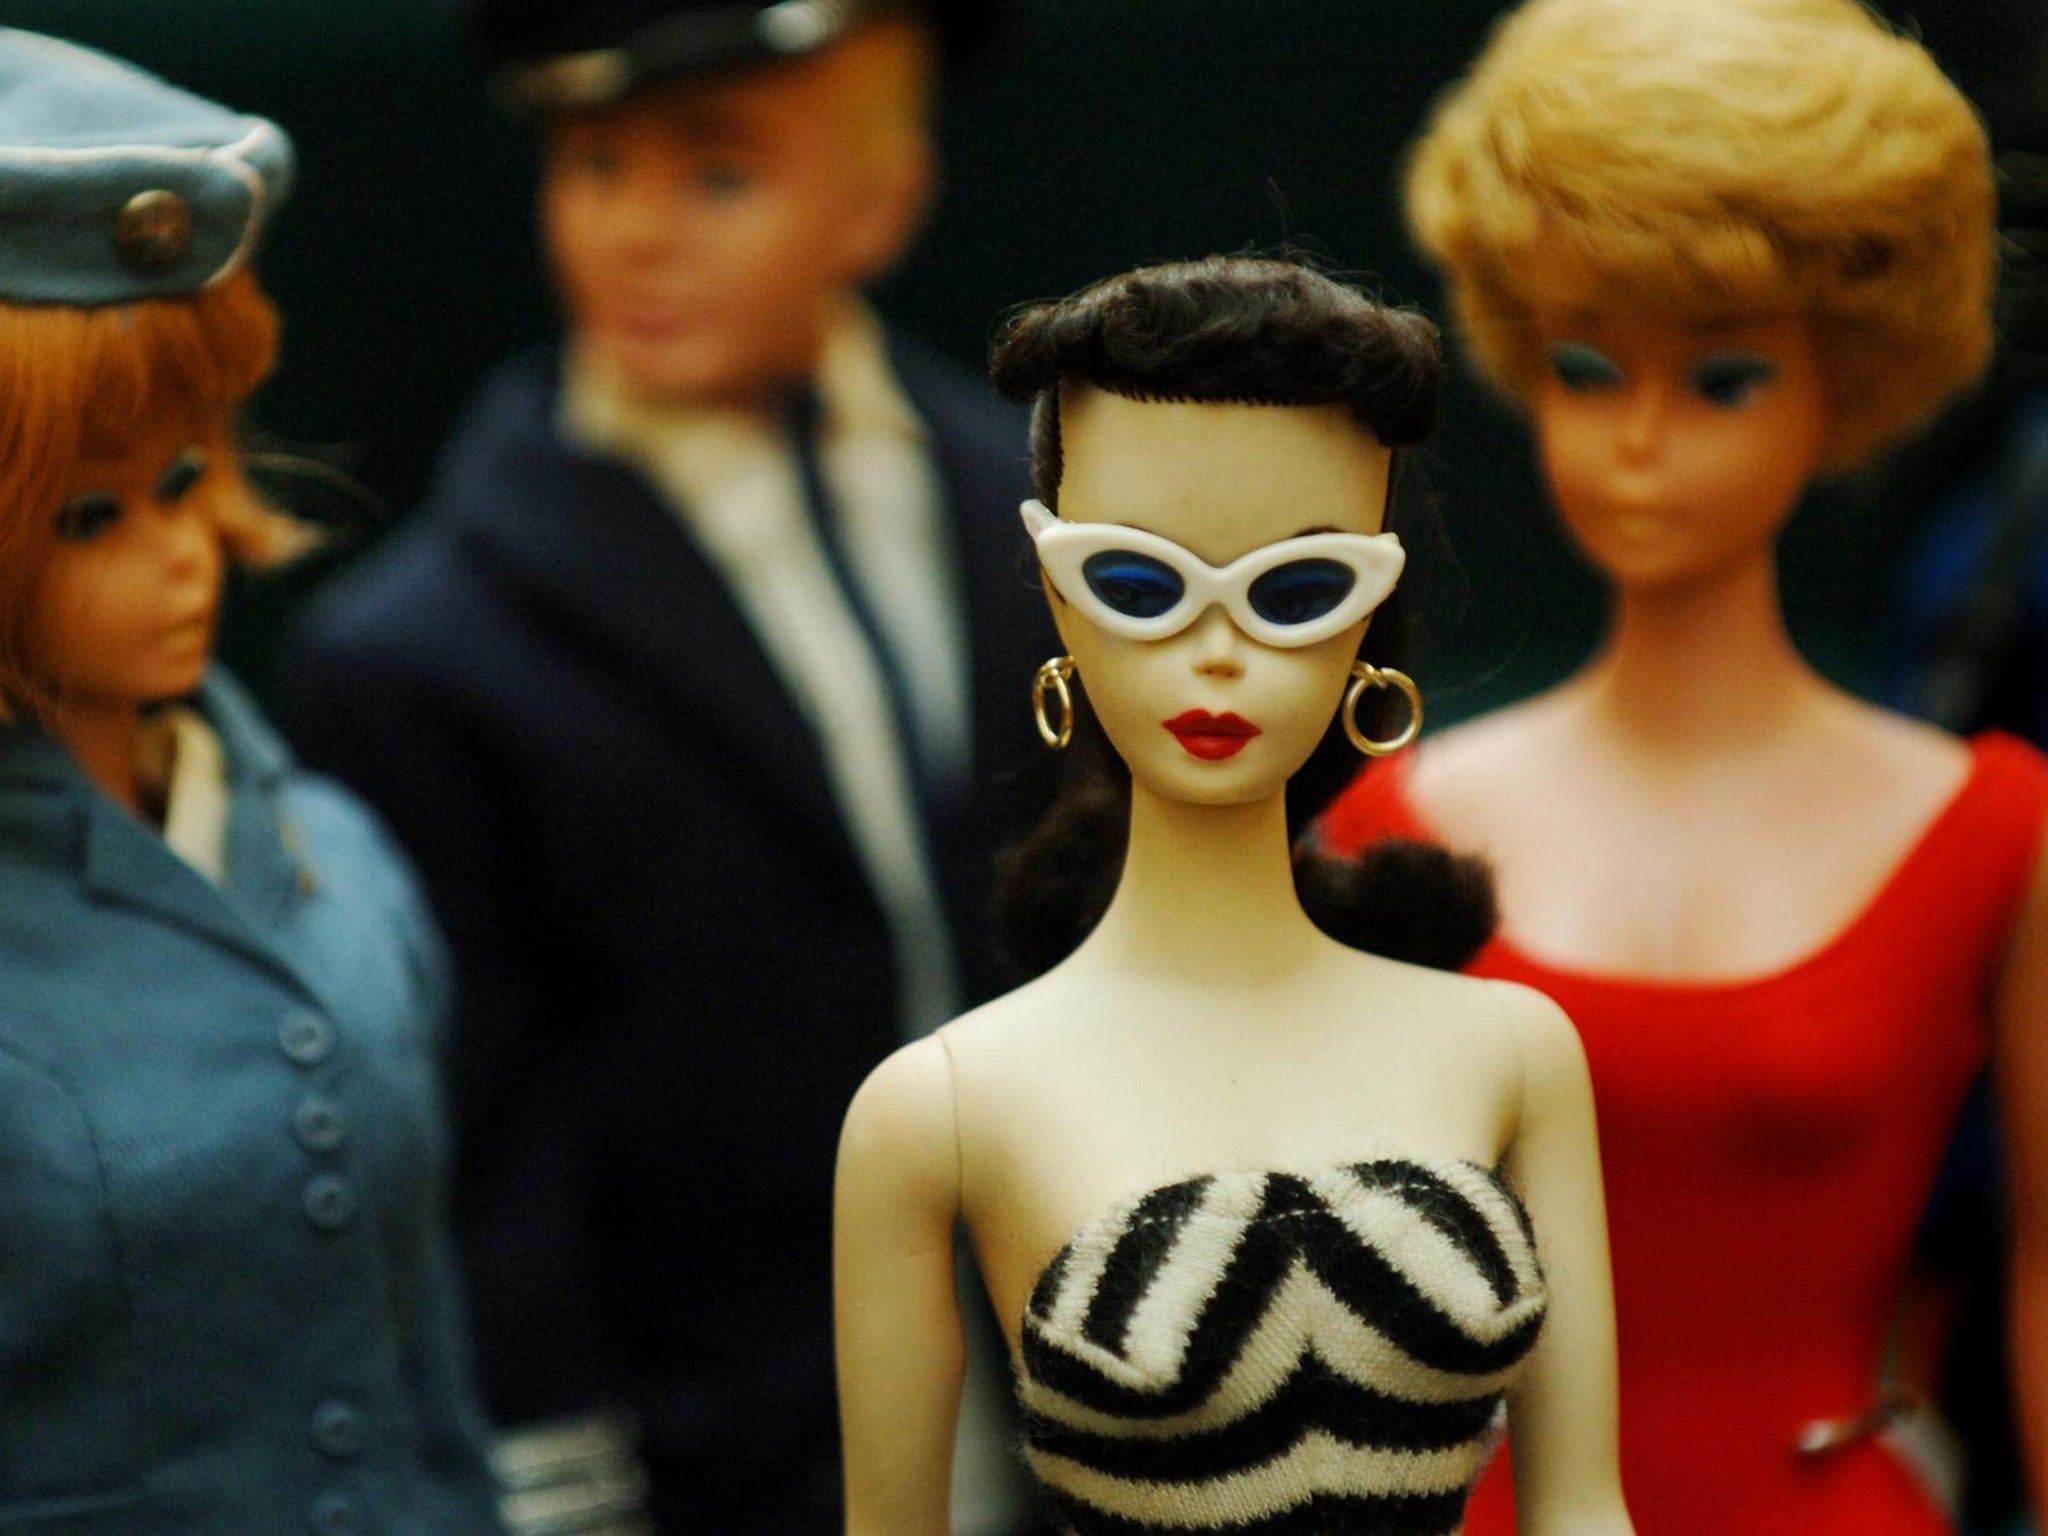 Value of the dolls: the first Barbie doll model was created in 1959 by Ruth Handler, president of Mattel